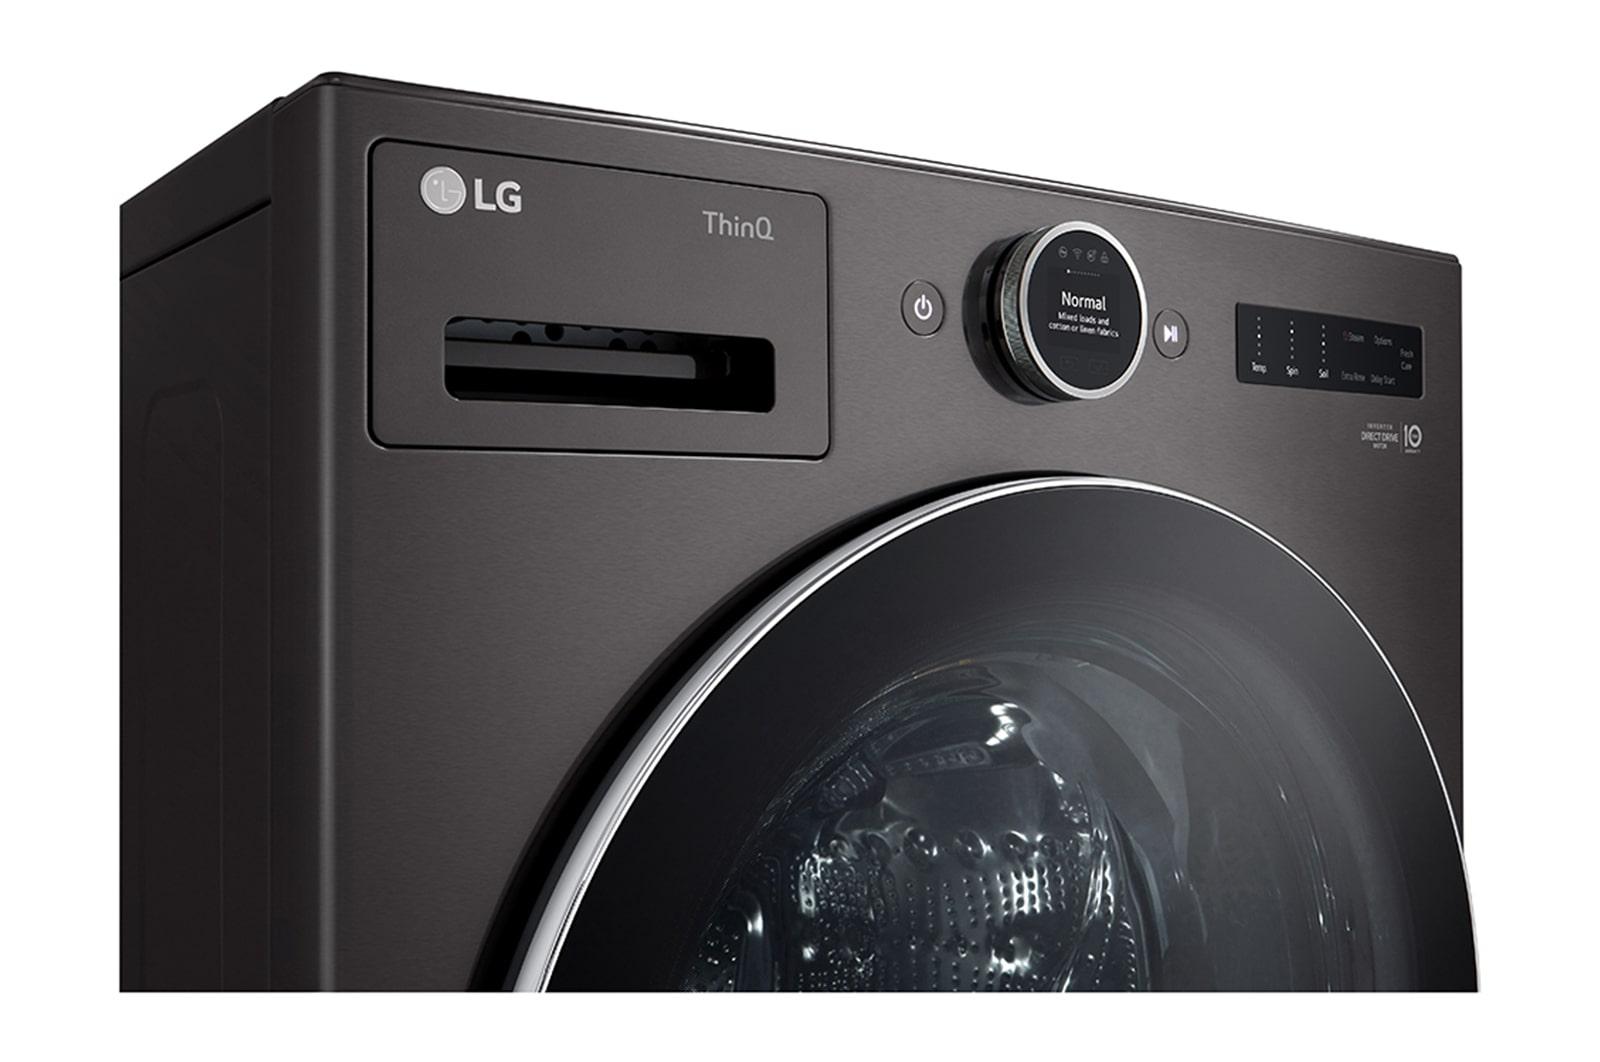 Lg 5.0 cu. ft. Mega Capacity Smart Front Load Washer with AI DD® 2.0 Built-In Intelligence